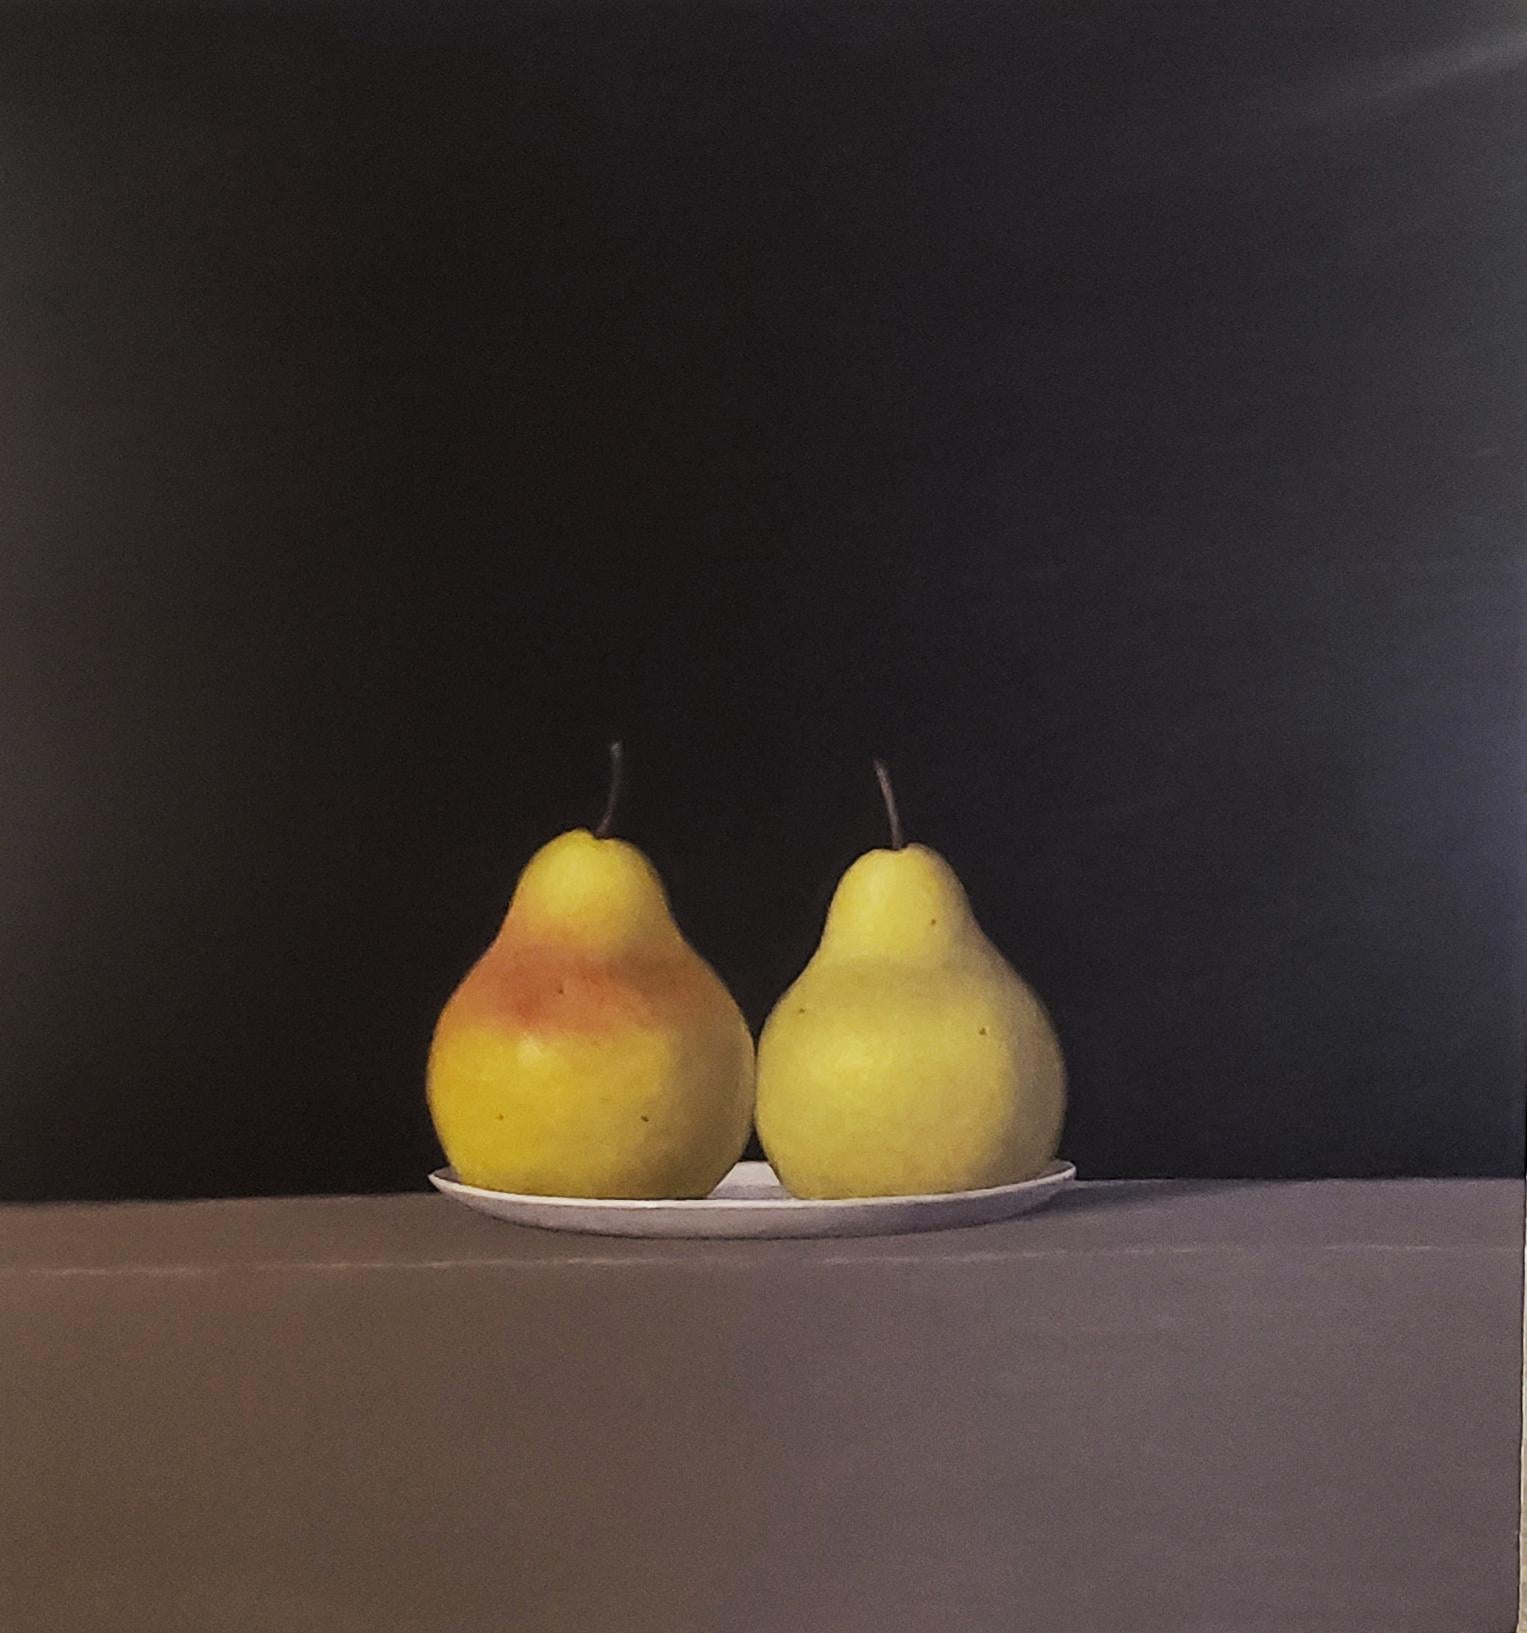 David Harrison, is a master in the style of Realism painting. Two Pears on a Pewter Plate shows the simple beauty of Realism paintings.
Harrison, a painter from the Boston area focuses on the interaction of positive and negative space in a short